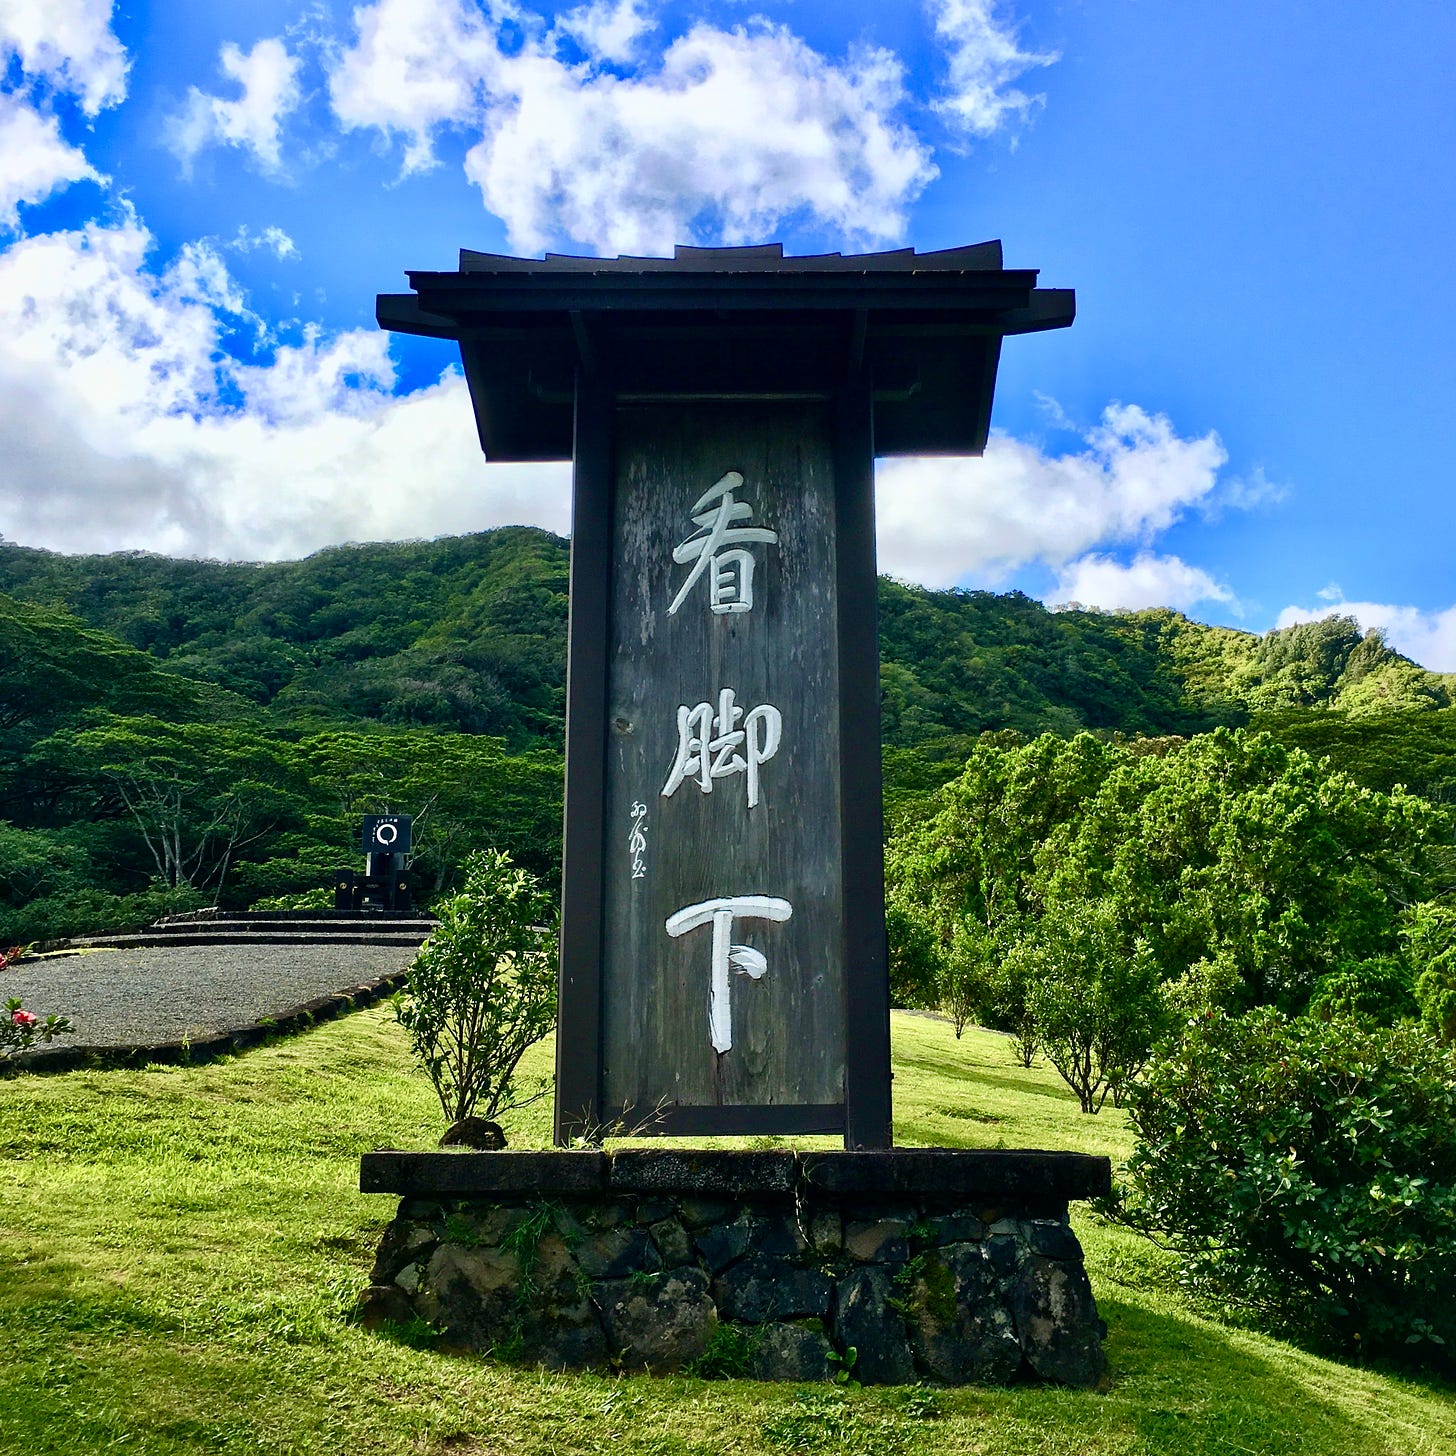 A wooden sign with Chinese characters on a grassy hill